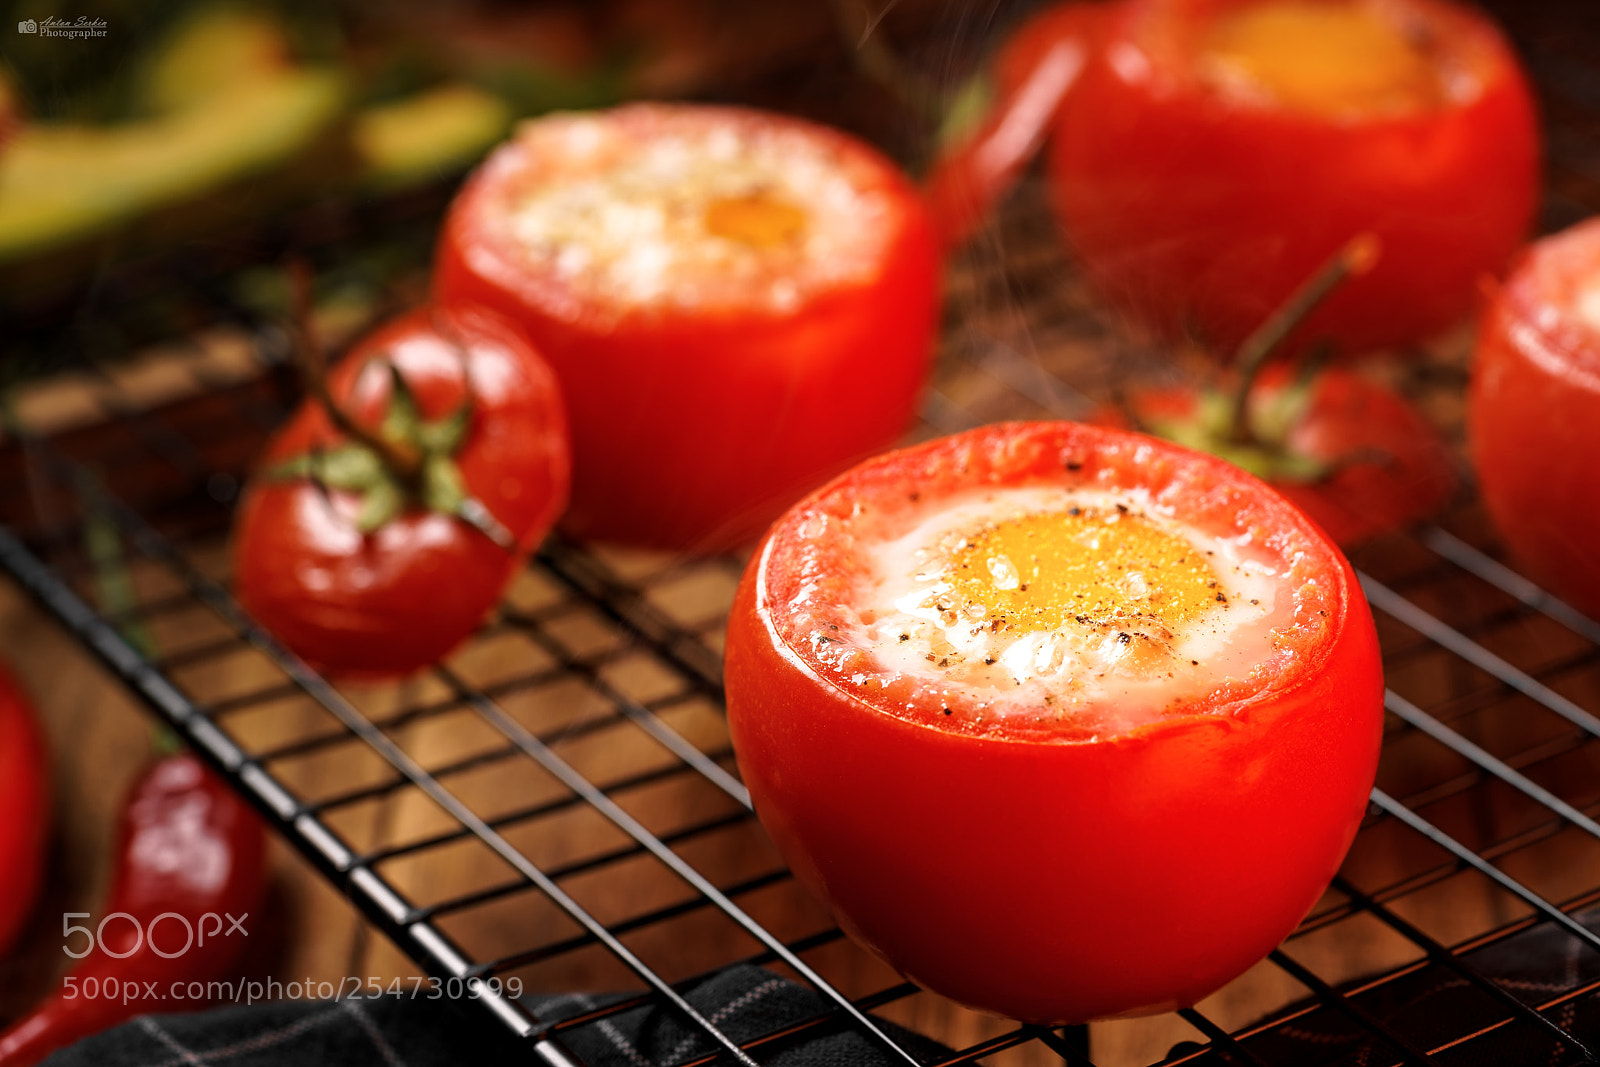 Sony a7R II sample photo. Tomatoes with egg photography